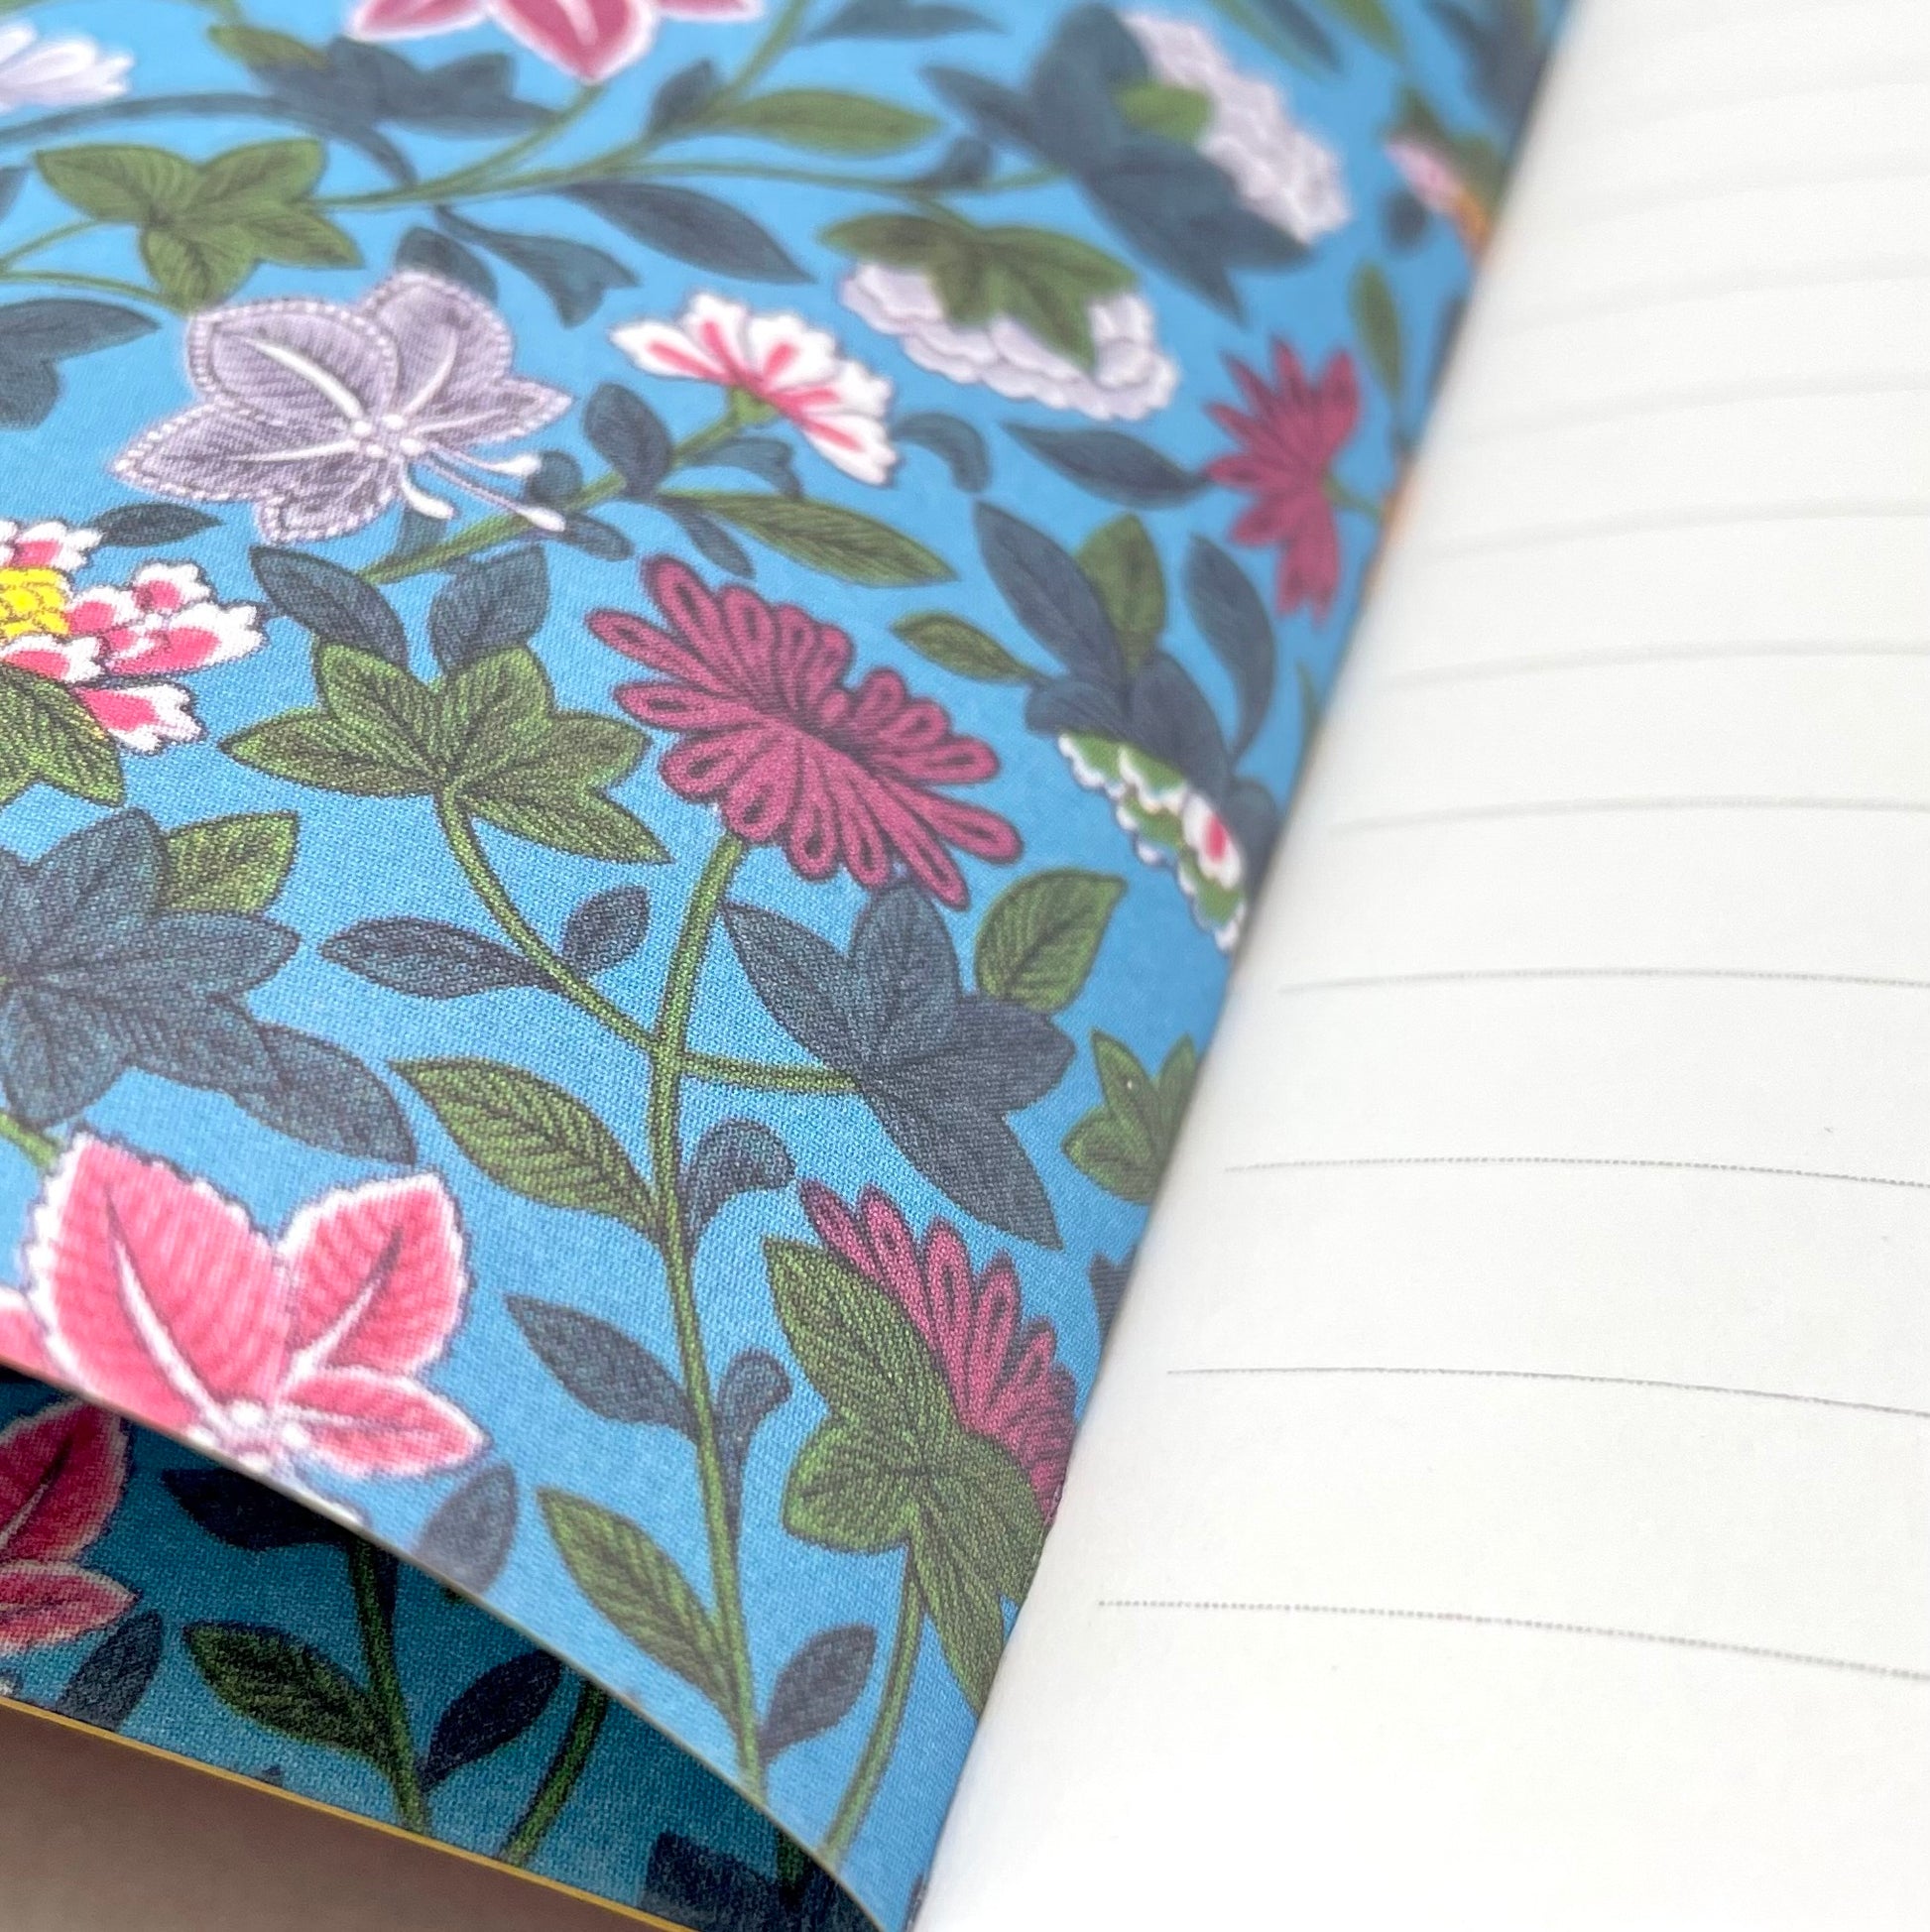 A5 lined notebook with a chinese design of peacock and flowers on a red background, blue floral endpaper close-up